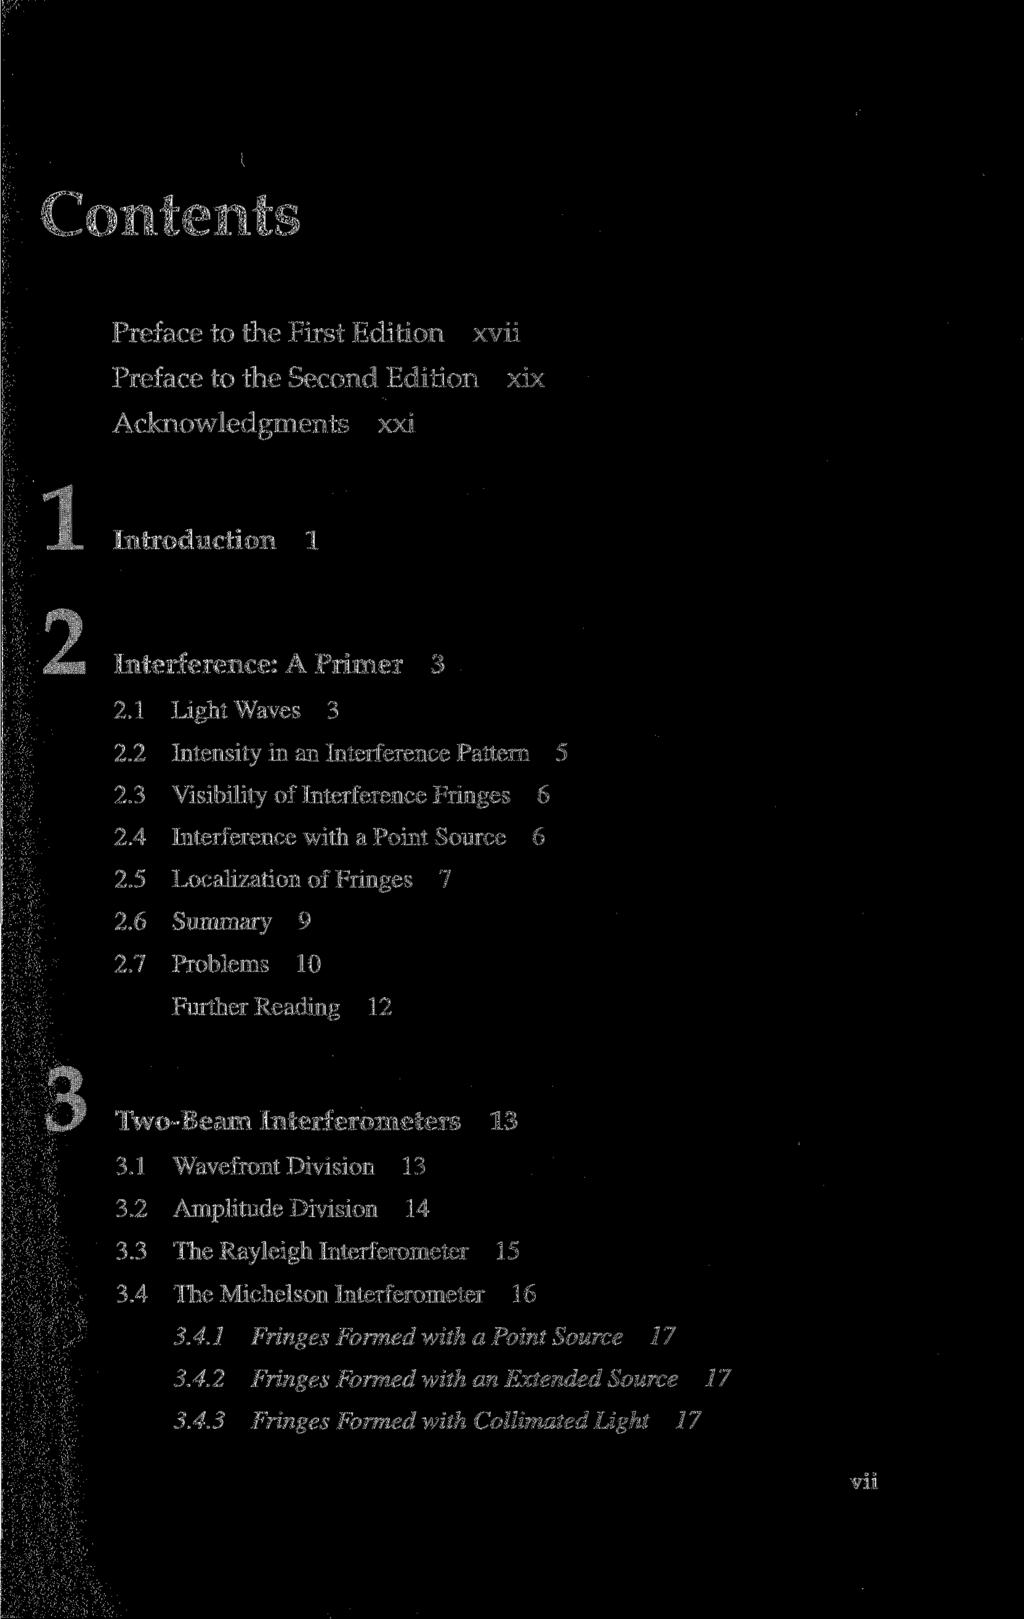 Contents Preface to the First Edition xvii Preface to the Second Edition xix Acknowledgments xxi Introduction 1 Interf erence: A Primer 3 2.1 Light Waves 3 2.